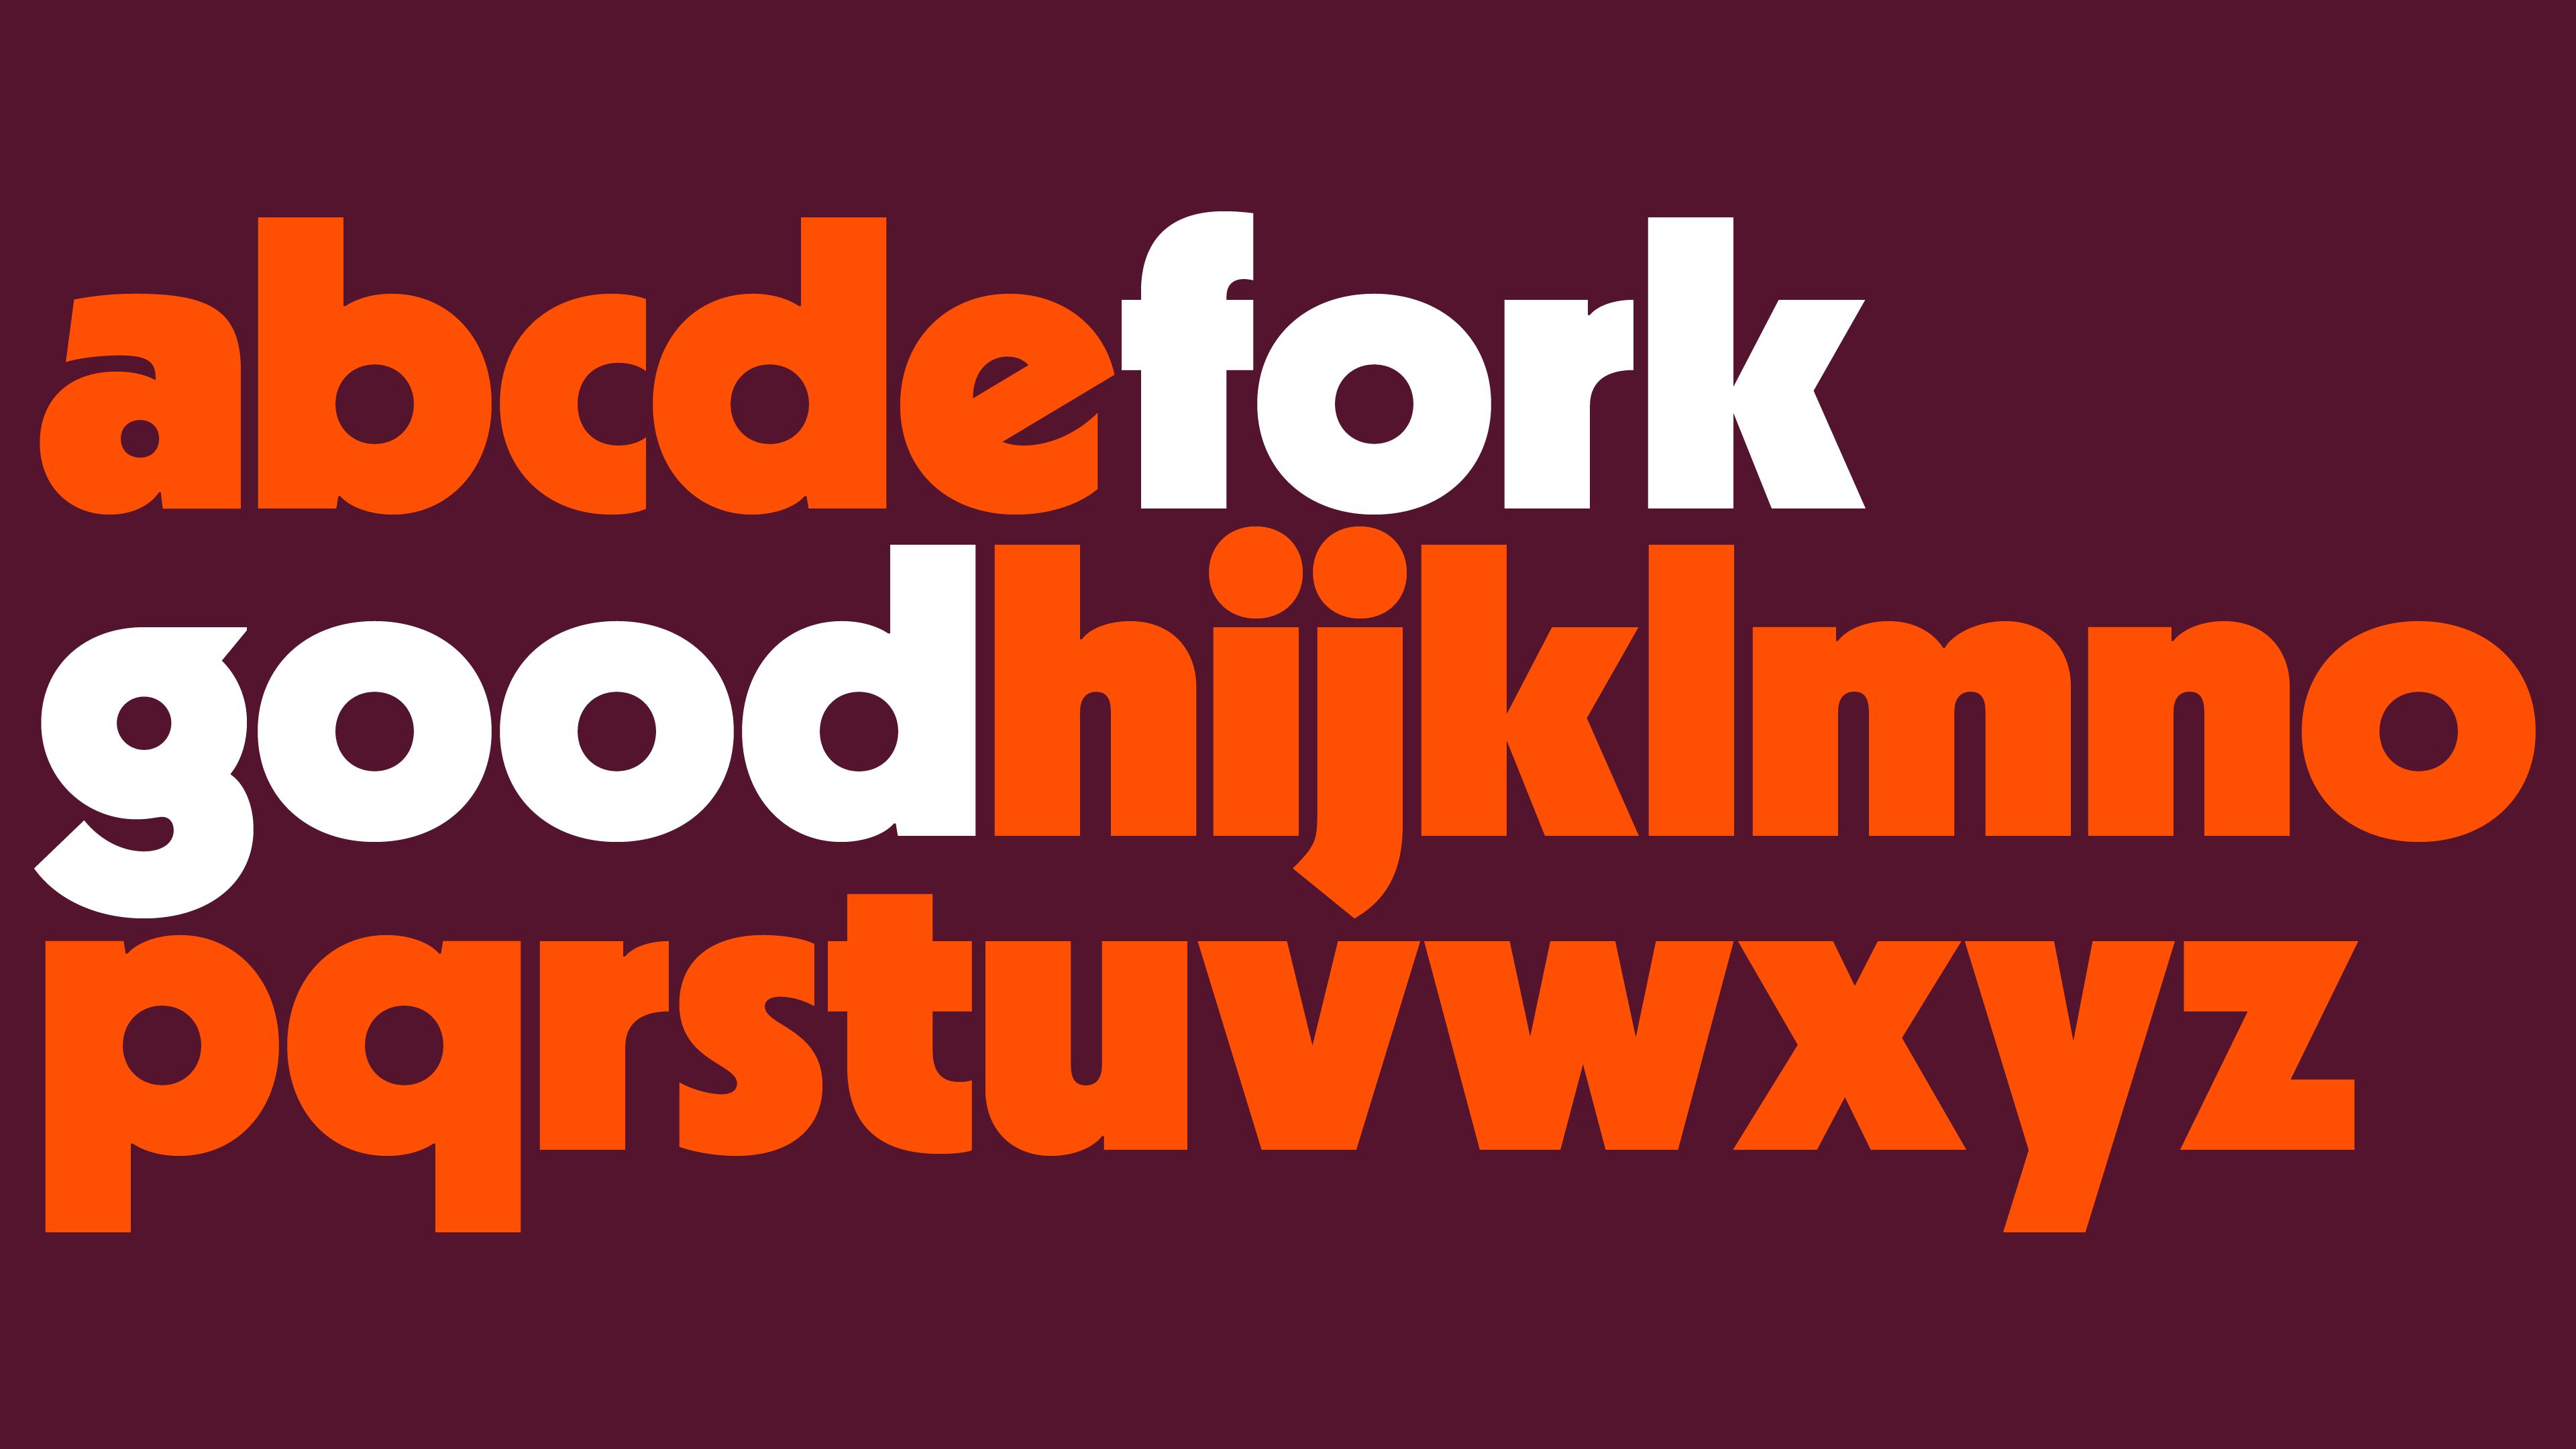 Logo design, brand identity and custom typeface for cultivated meat business Fork & Good